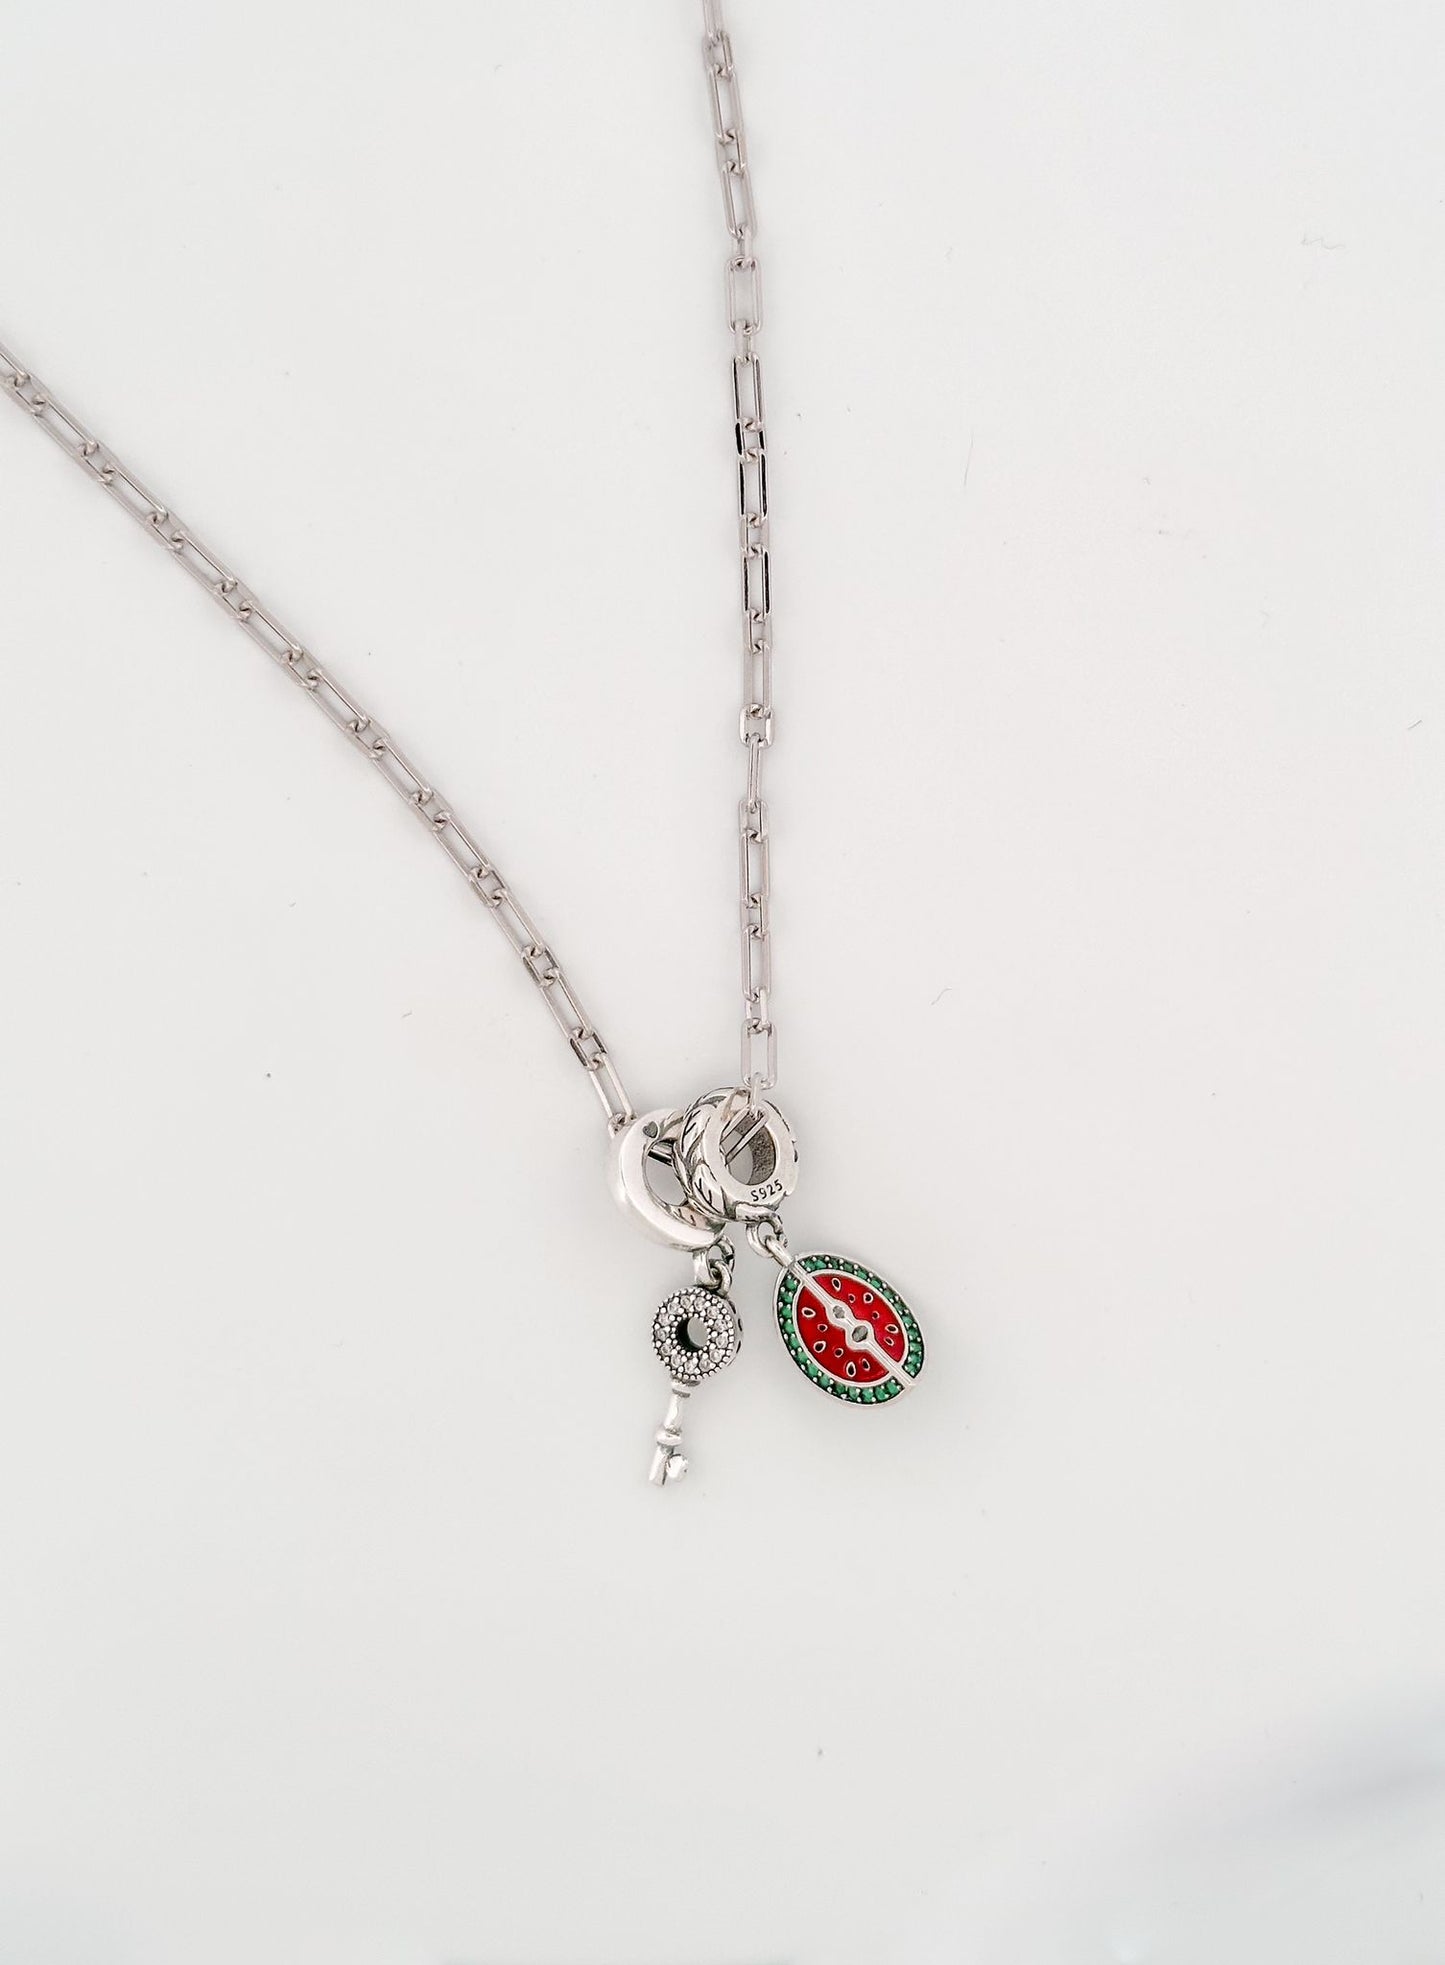 Watermelon and Key Charm Necklace